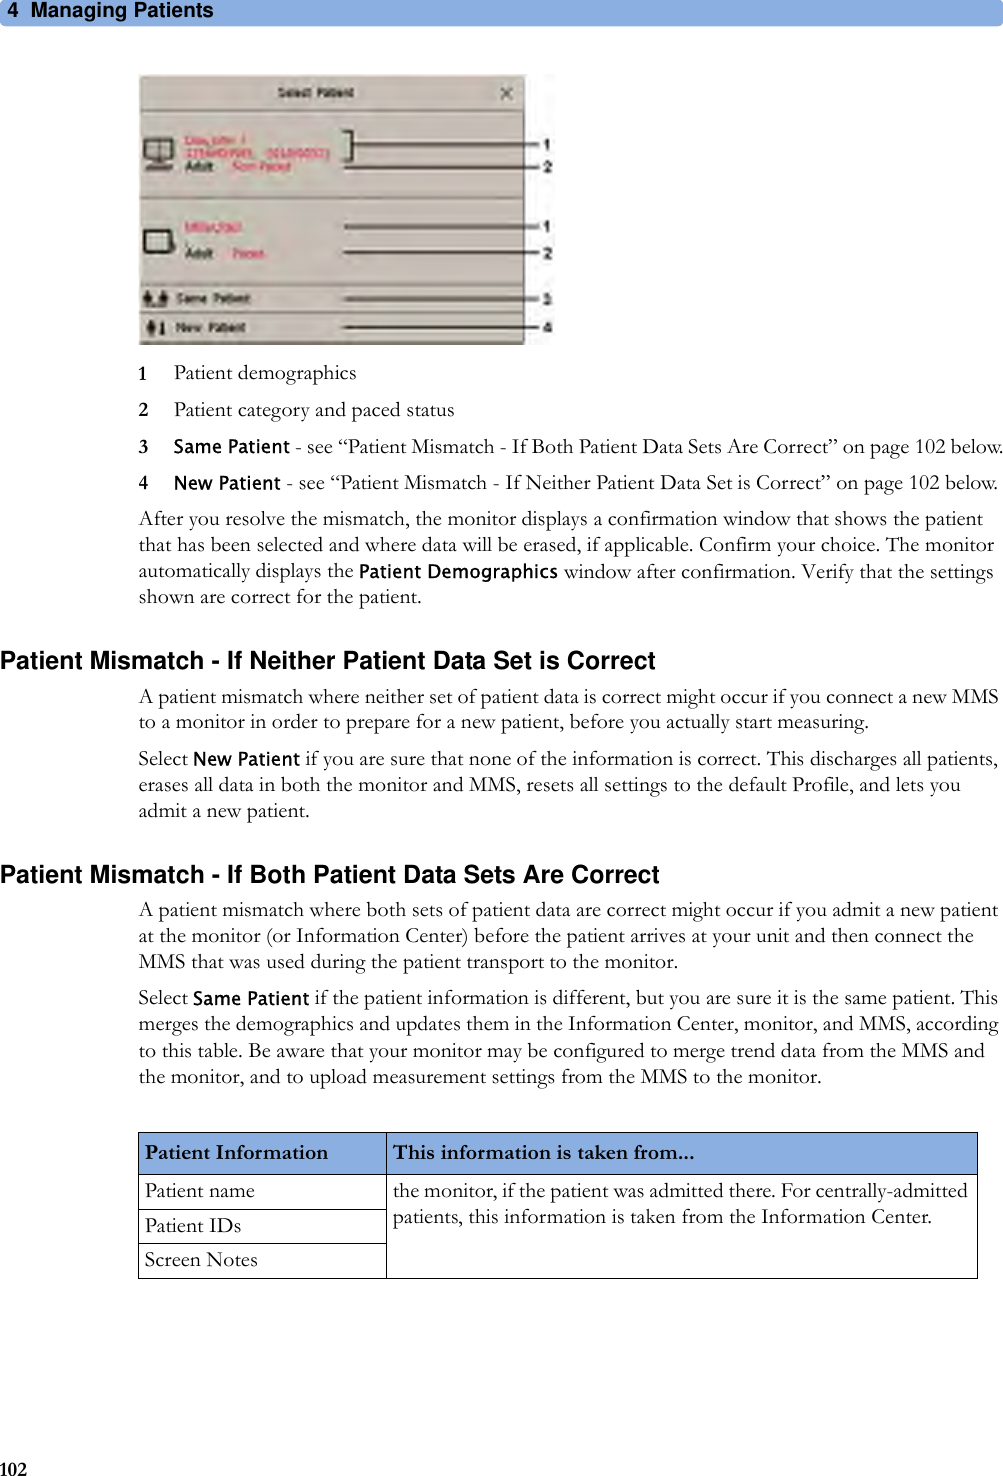 4 Managing Patients1021Patient demographics2Patient category and paced status3Same Patient - see “Patient Mismatch - If Both Patient Data Sets Are Correct” on page 102 below.4New Patient - see “Patient Mismatch - If Neither Patient Data Set is Correct” on page 102 below.After you resolve the mismatch, the monitor displays a confirmation window that shows the patient that has been selected and where data will be erased, if applicable. Confirm your choice. The monitor automatically displays the Patient Demographics window after confirmation. Verify that the settings shown are correct for the patient.Patient Mismatch - If Neither Patient Data Set is CorrectA patient mismatch where neither set of patient data is correct might occur if you connect a new MMS to a monitor in order to prepare for a new patient, before you actually start measuring.Select New Patient if you are sure that none of the information is correct. This discharges all patients, erases all data in both the monitor and MMS, resets all settings to the default Profile, and lets you admit a new patient.Patient Mismatch - If Both Patient Data Sets Are CorrectA patient mismatch where both sets of patient data are correct might occur if you admit a new patient at the monitor (or Information Center) before the patient arrives at your unit and then connect the MMS that was used during the patient transport to the monitor.Select Same Patient if the patient information is different, but you are sure it is the same patient. This merges the demographics and updates them in the Information Center, monitor, and MMS, according to this table. Be aware that your monitor may be configured to merge trend data from the MMS and the monitor, and to upload measurement settings from the MMS to the monitor.Patient Information This information is taken from...Patient name the monitor, if the patient was admitted there. For centrally-admitted patients, this information is taken from the Information Center.Patient IDsScreen Notes